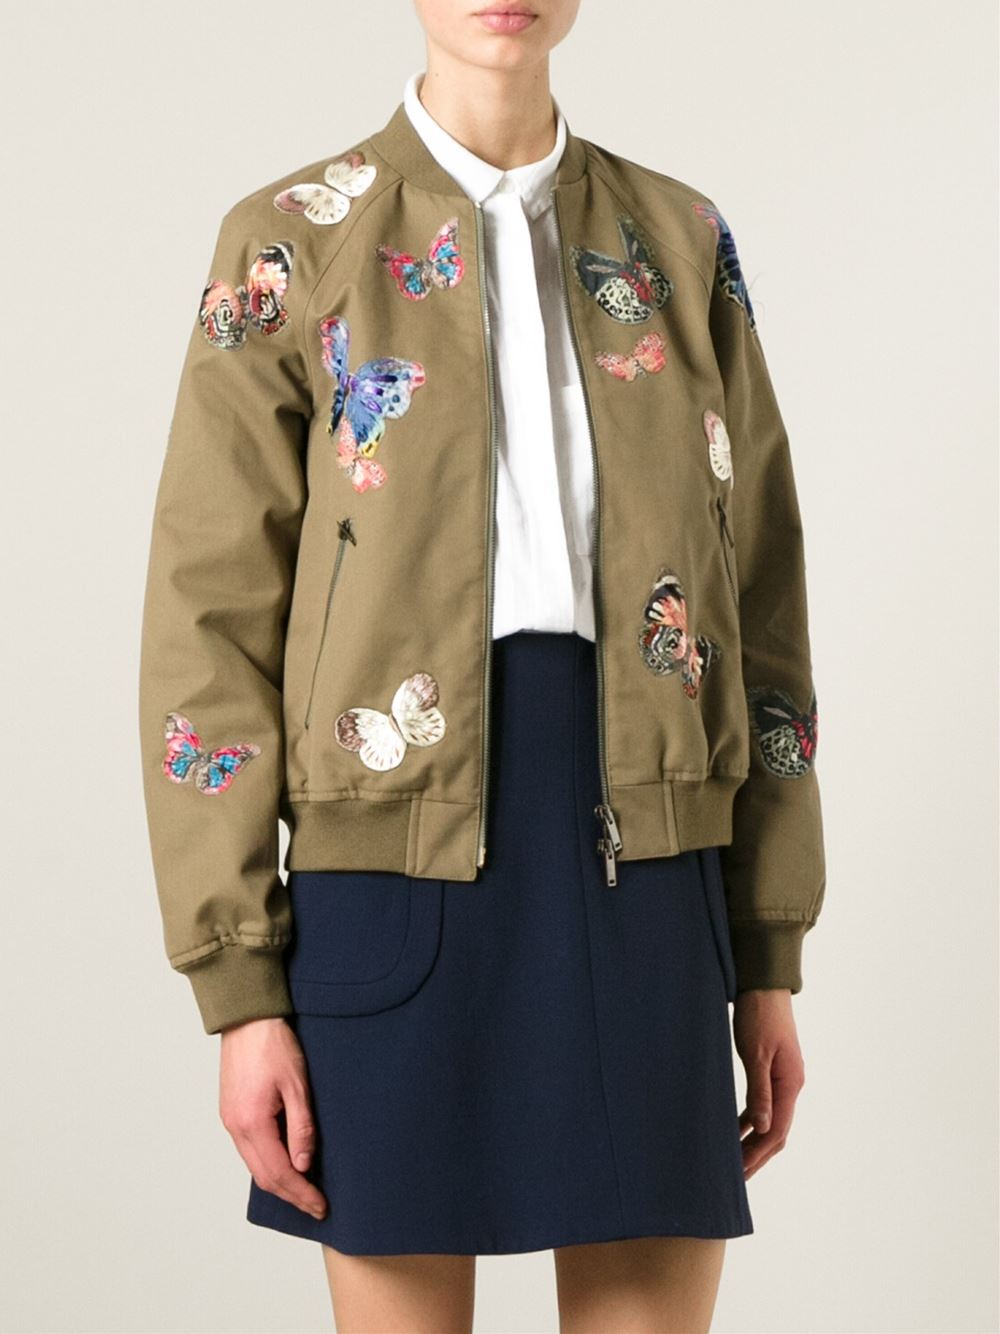 Valentino Stitched Butterfly Bomber Jacket in Green - Lyst